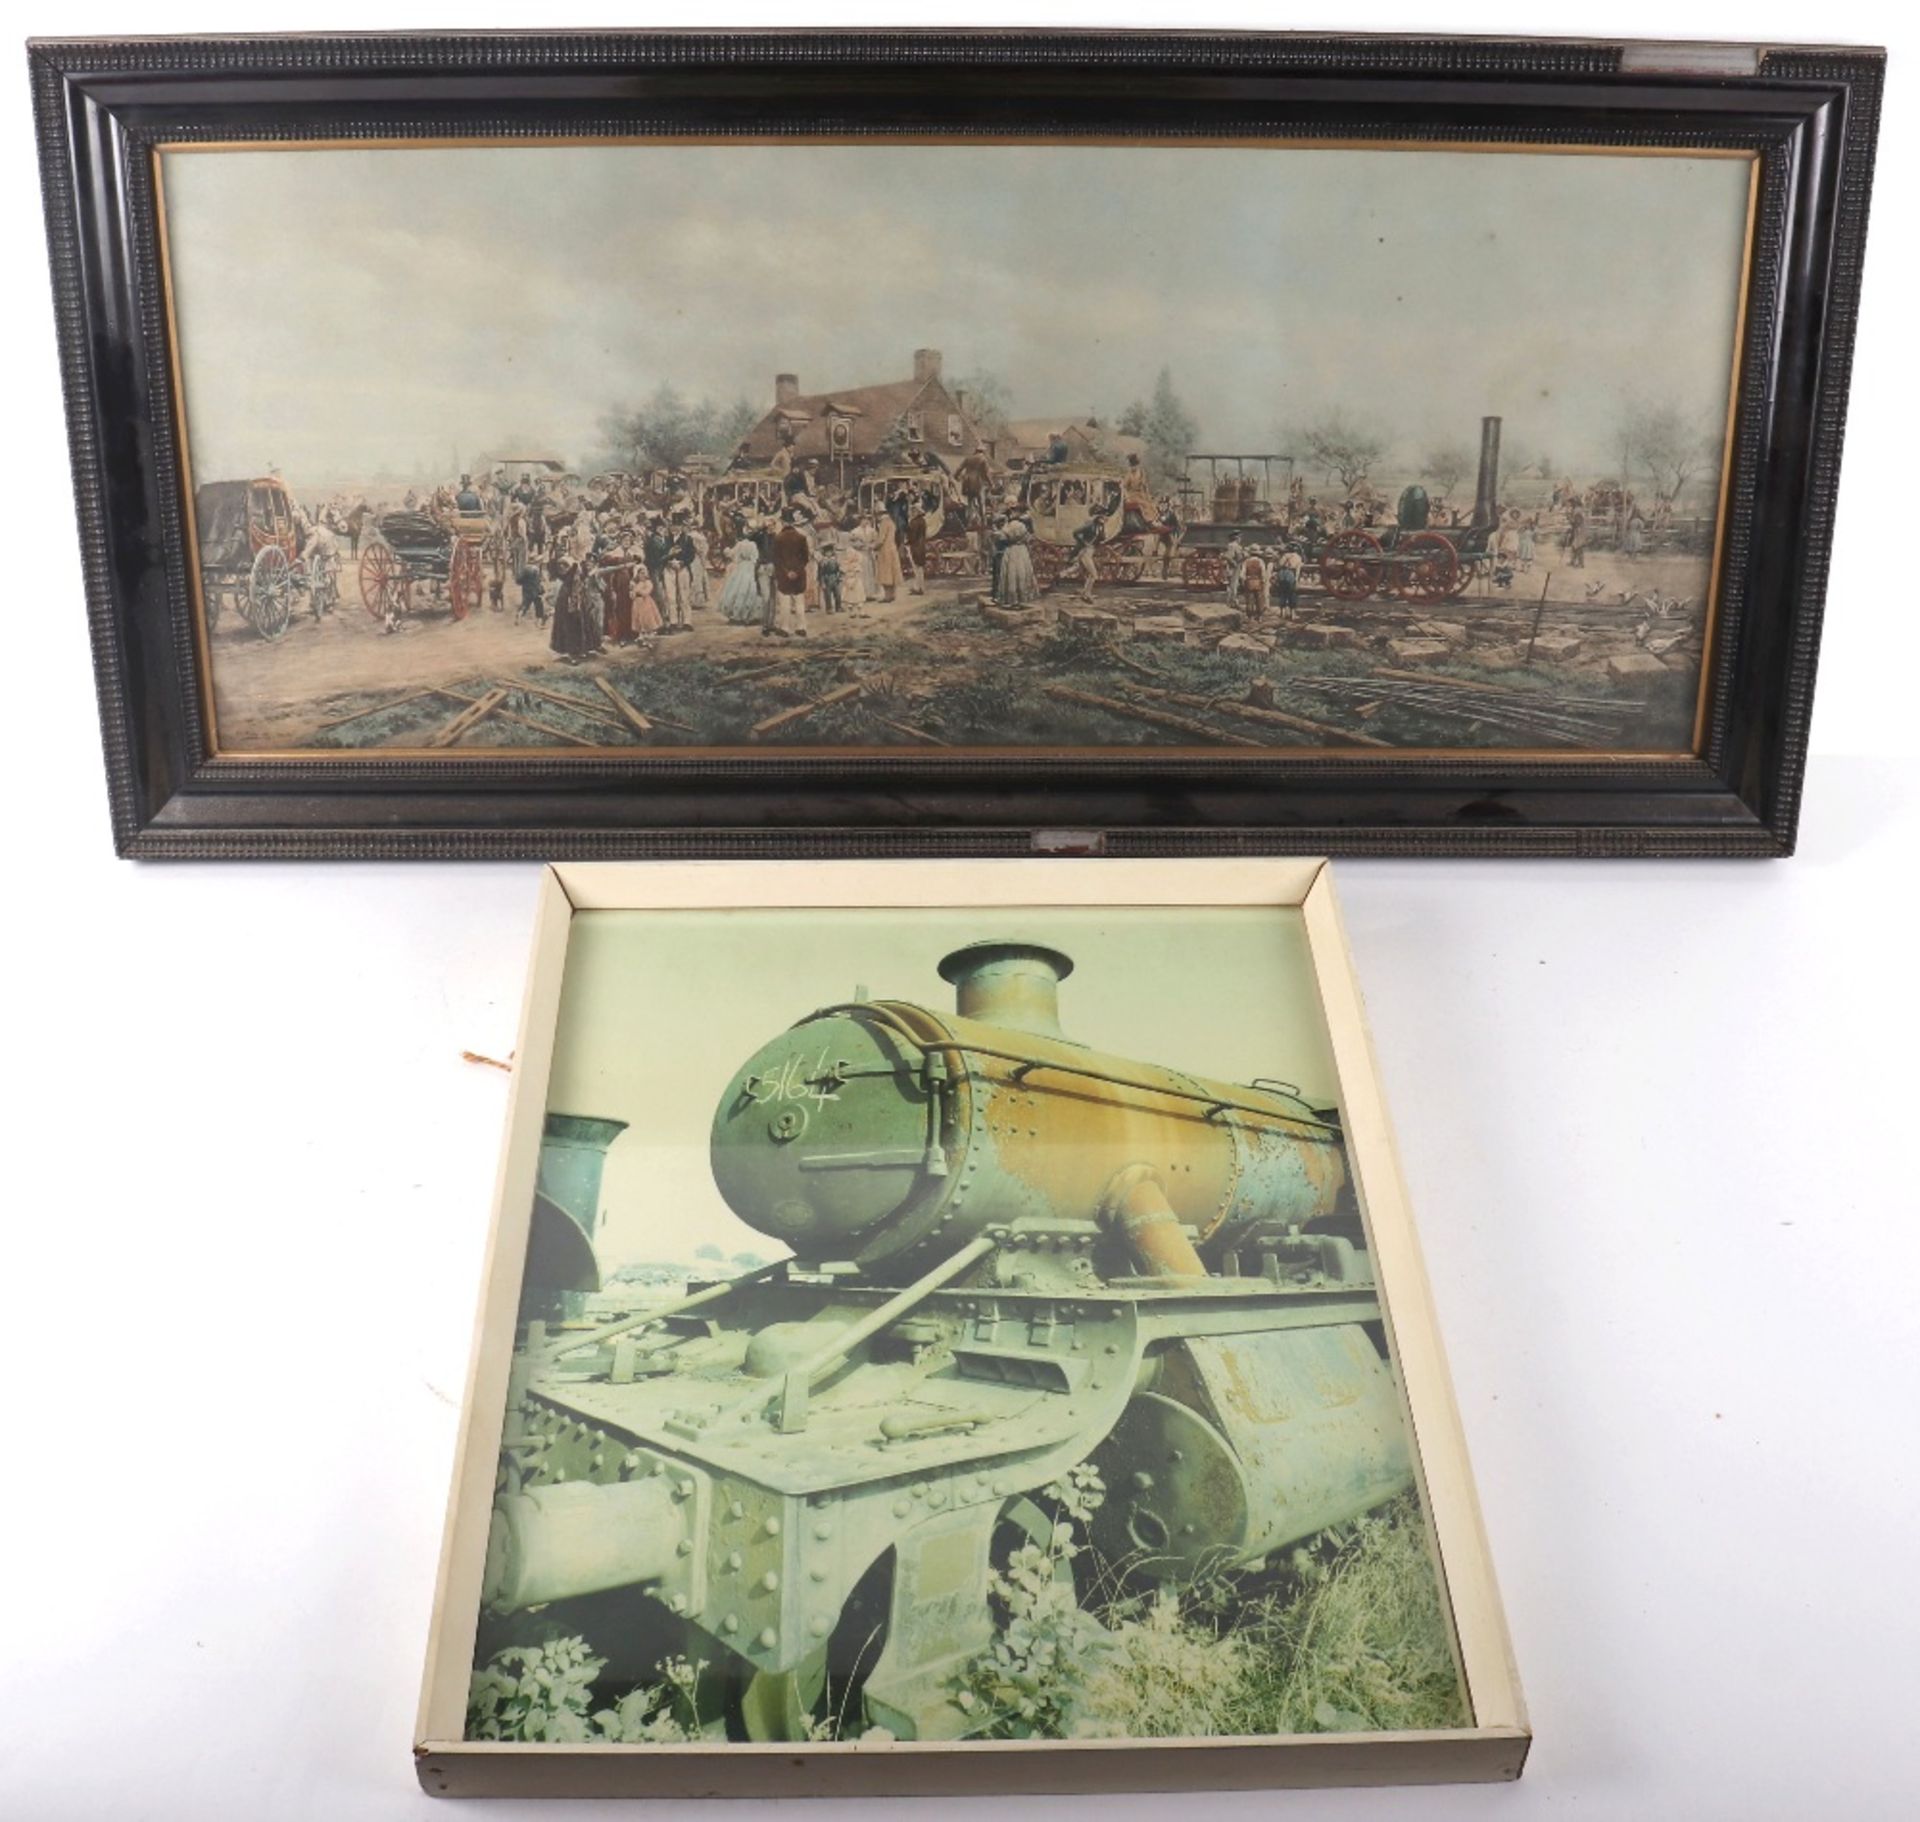 A framed print of an 18th century scene of steam locomotive and carriages in rural scene